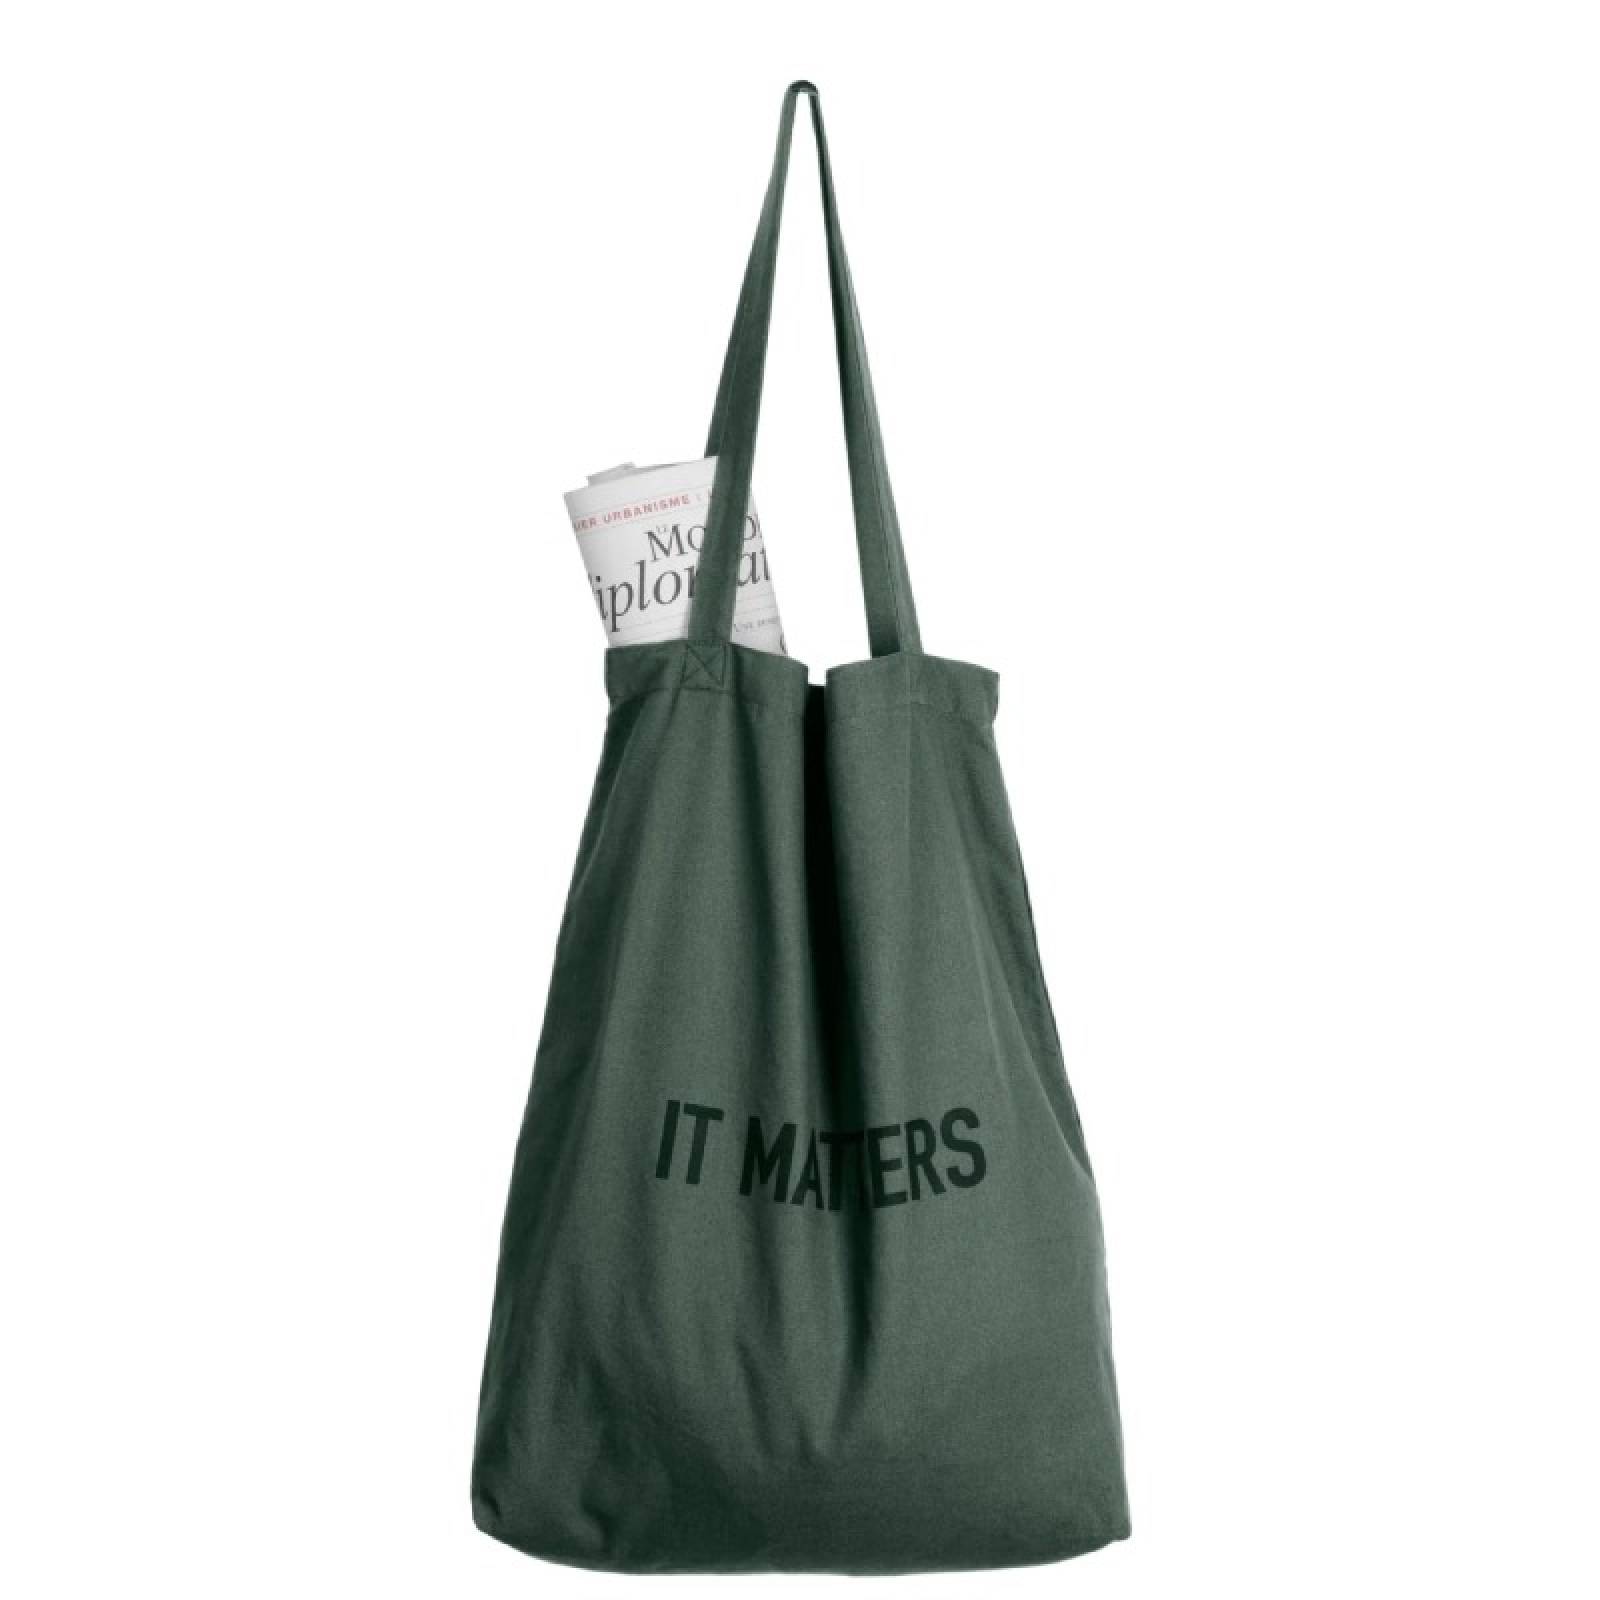 It Matters - Large Cotton Tote Bag In Dark Green thumbnails